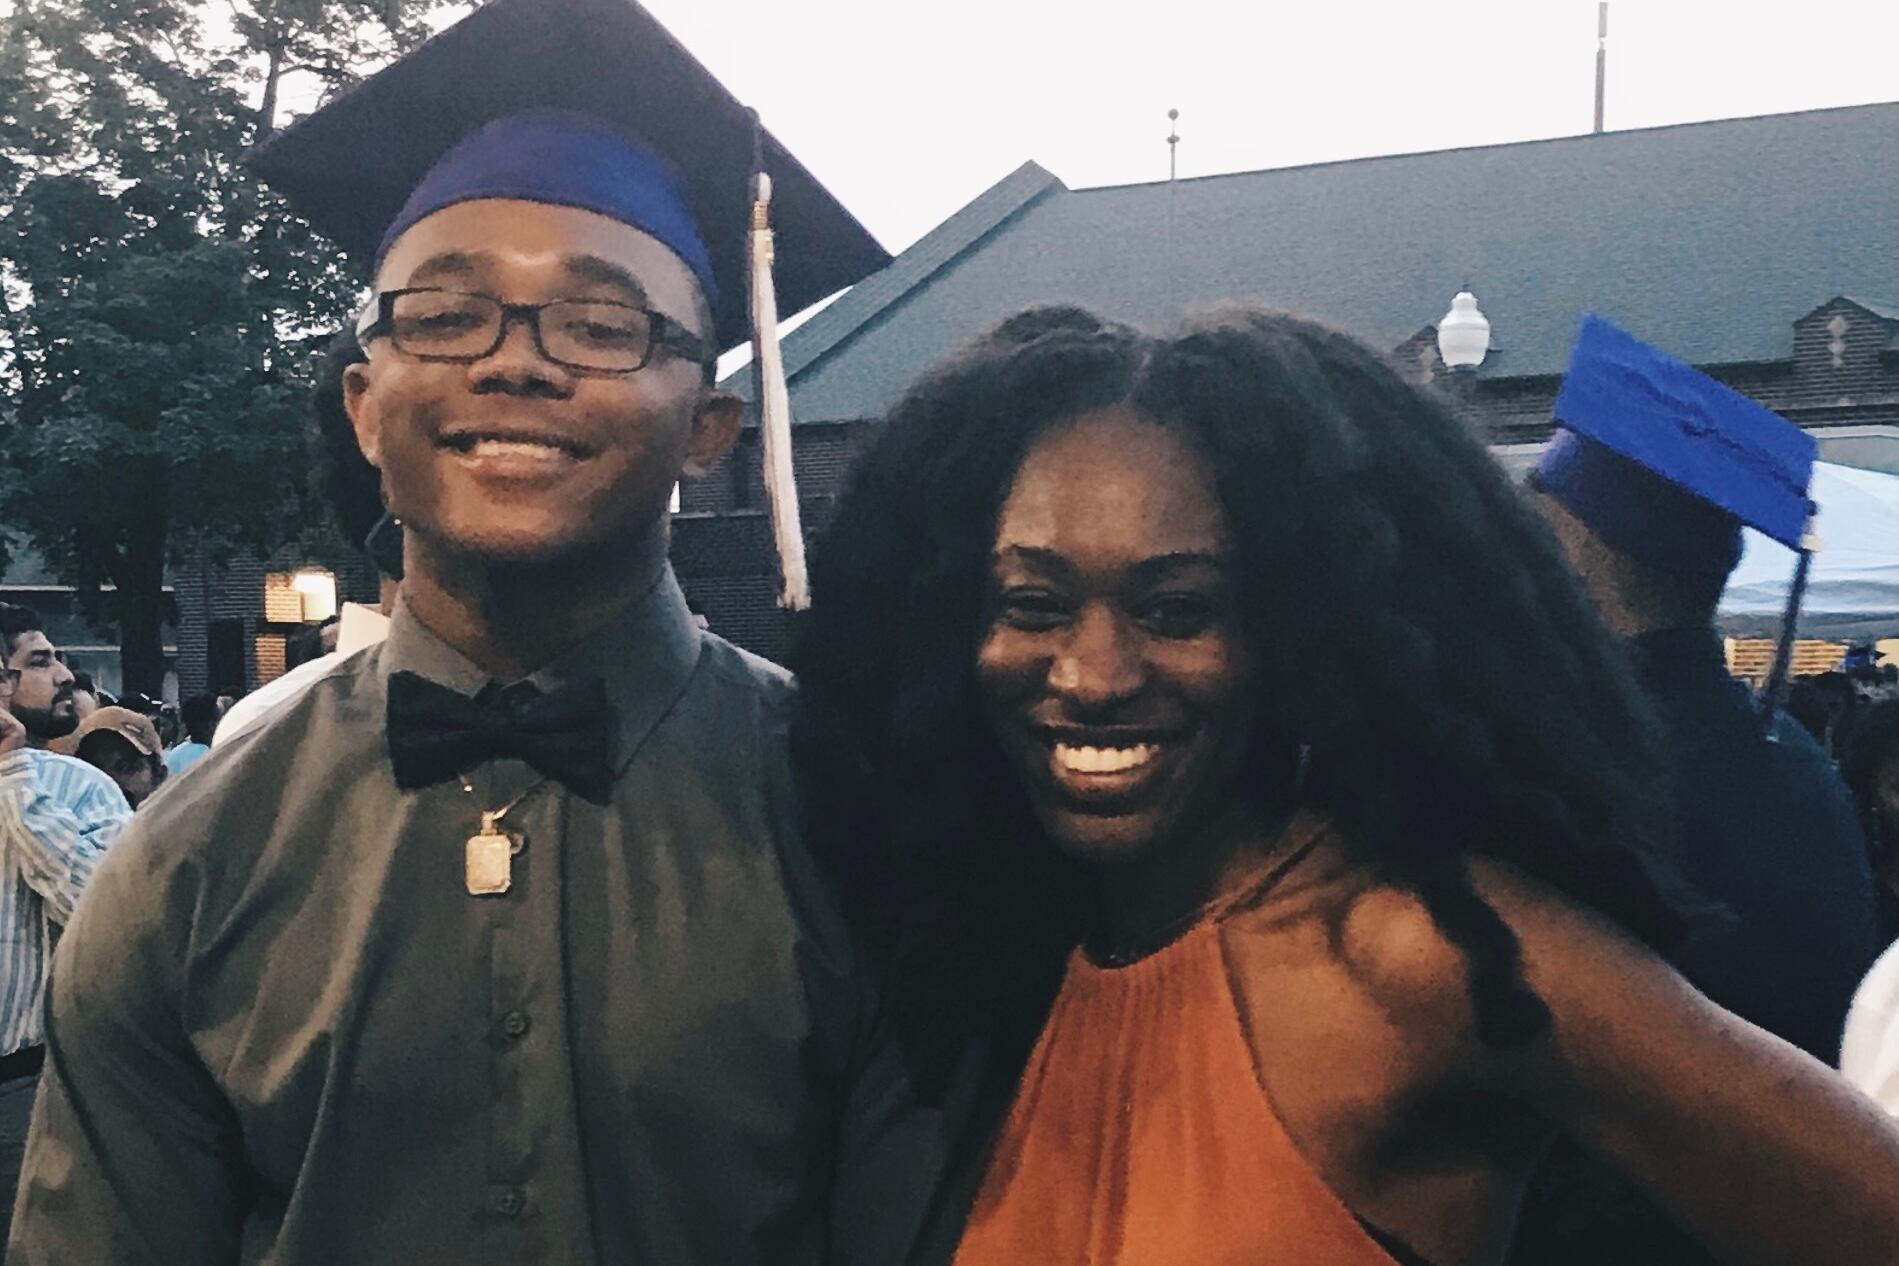 Reporter Aaricka Washington, right, poses with her 19-year-old brother LJ in cap and gown after his high school graduation.